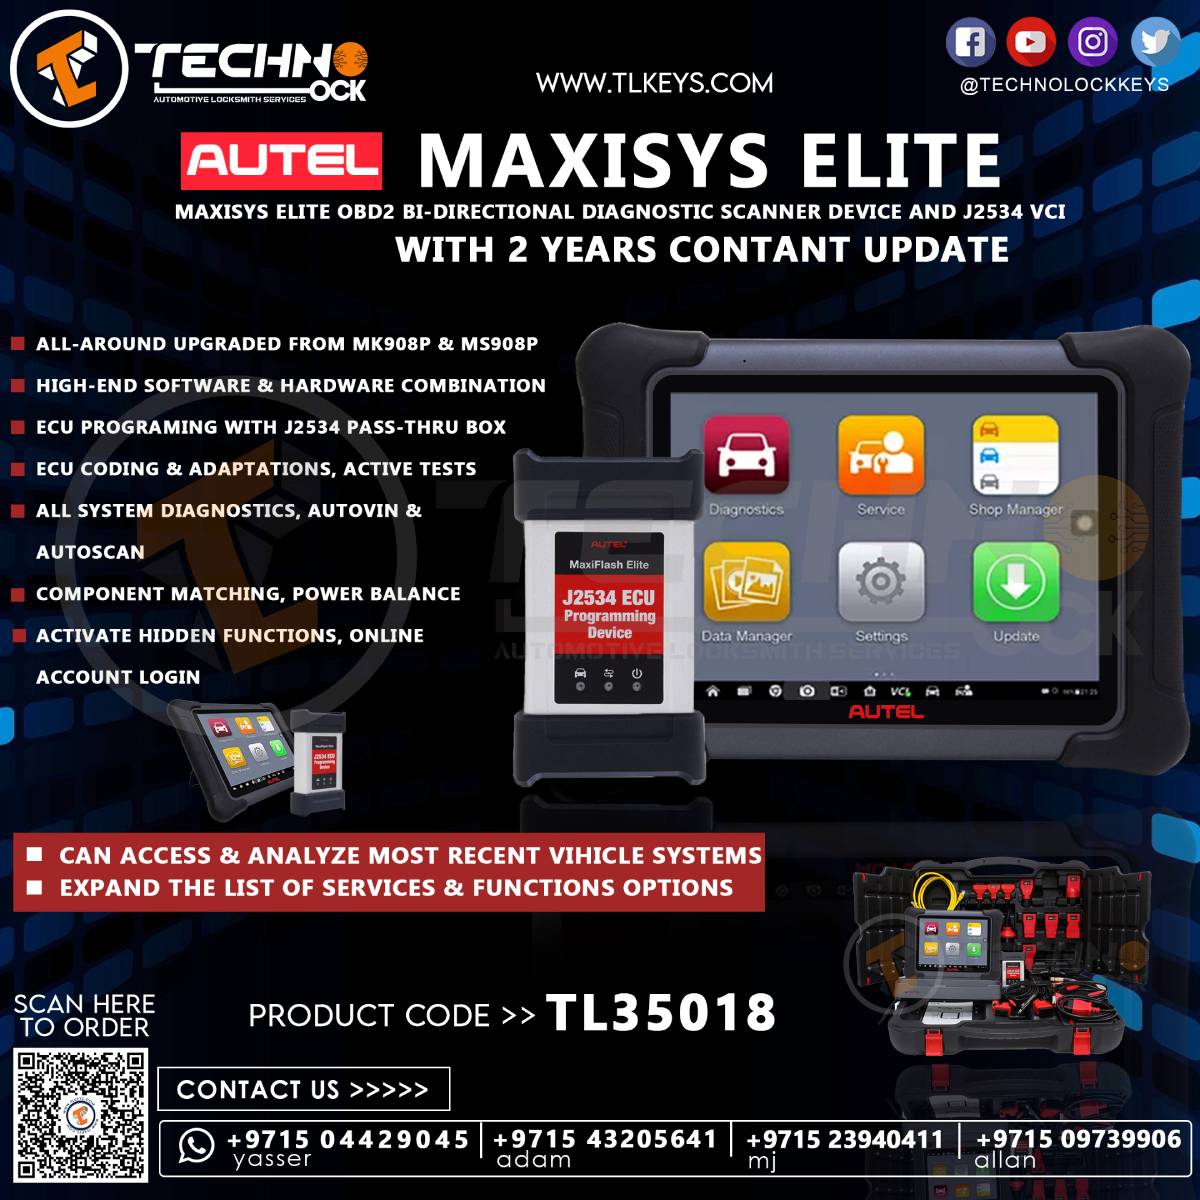 MAXISYS ELITE OBD2 BI-DIRECTIONAL DIAGNOSTIC SCANNER DEVICE AND J2534 VCI